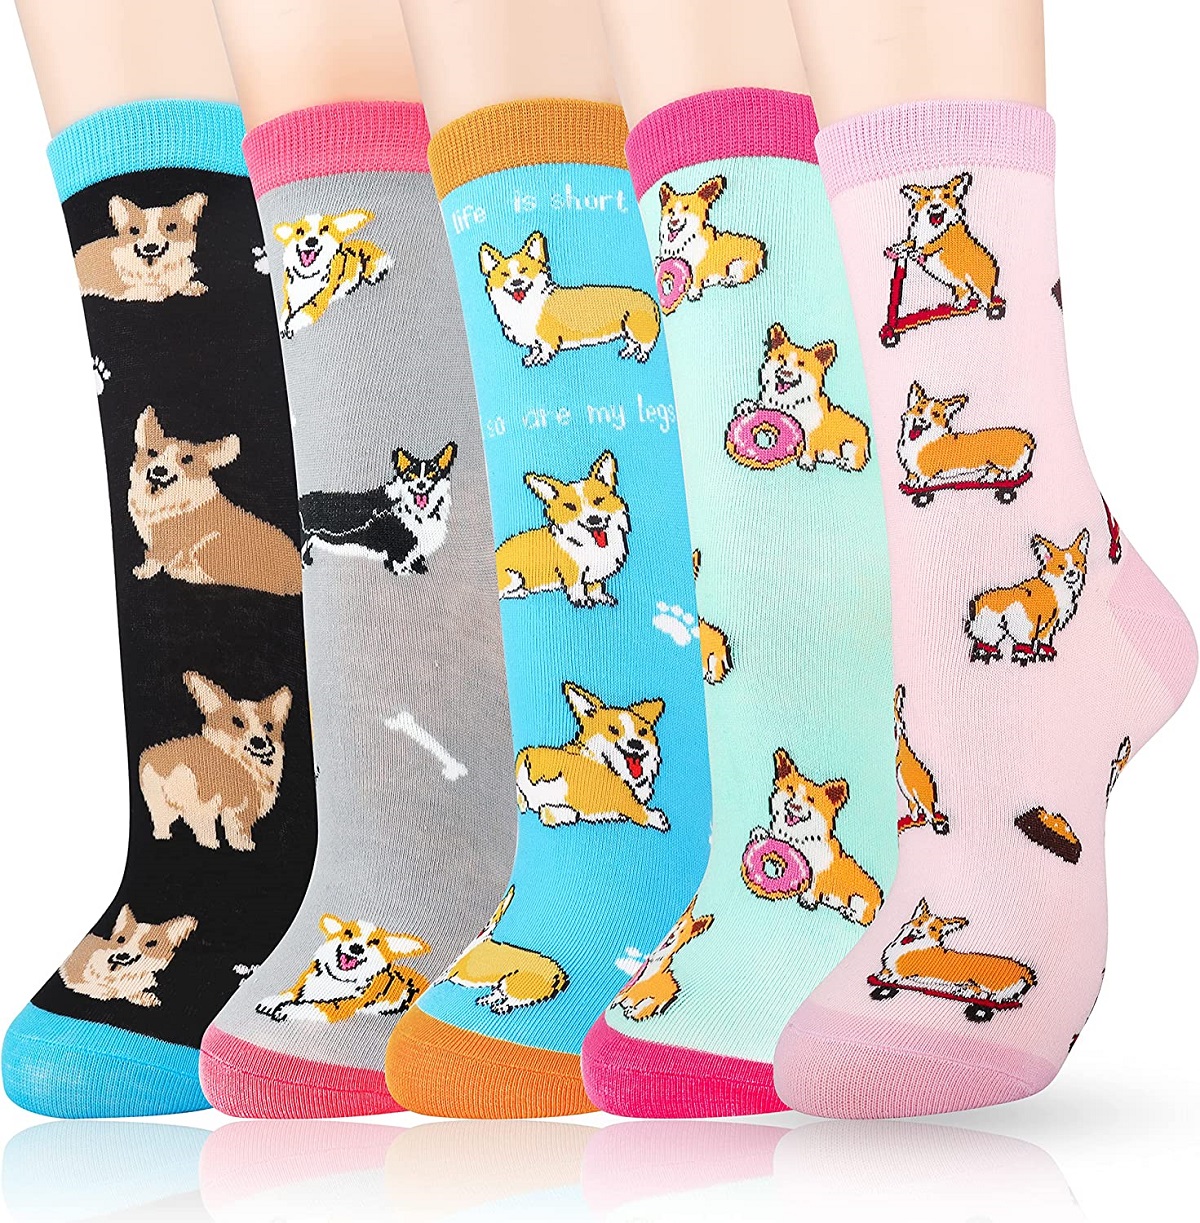 5-pairs-of-brightly-colored-socks-for-women-each-featuring-corgi-dogs-in-funny-and-cute-poses